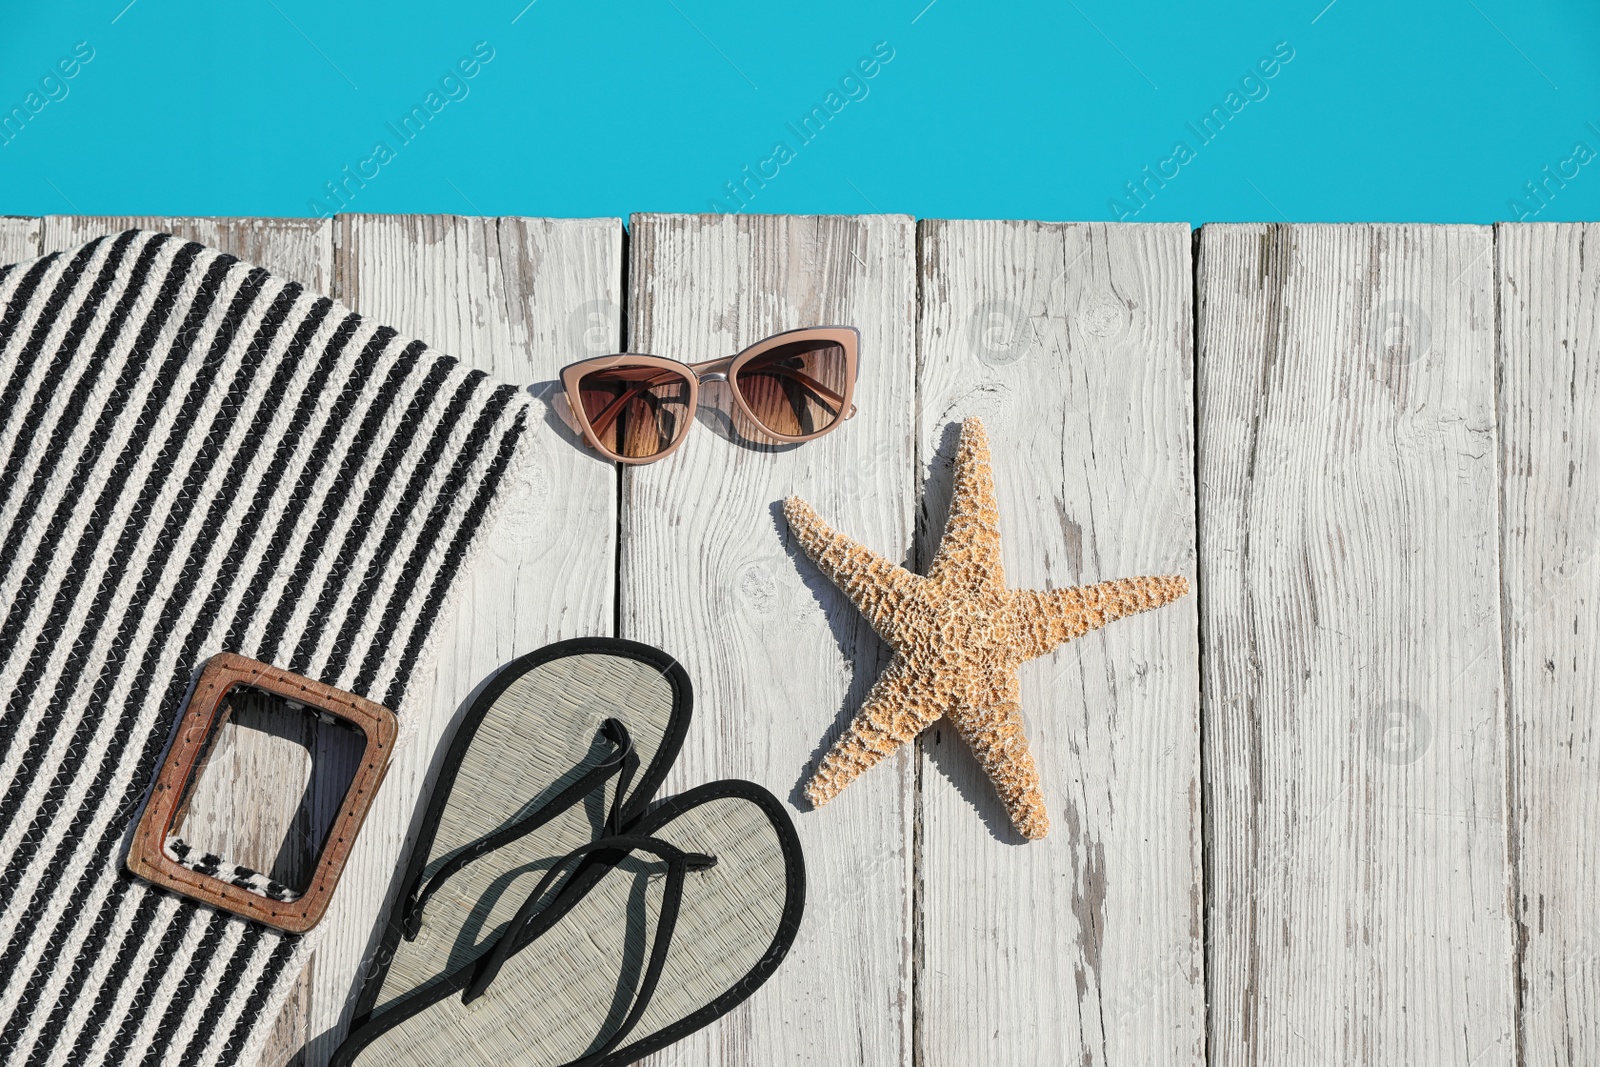 Photo of Beach accessories on wooden deck near outdoor swimming pool, flat lay. Space for text